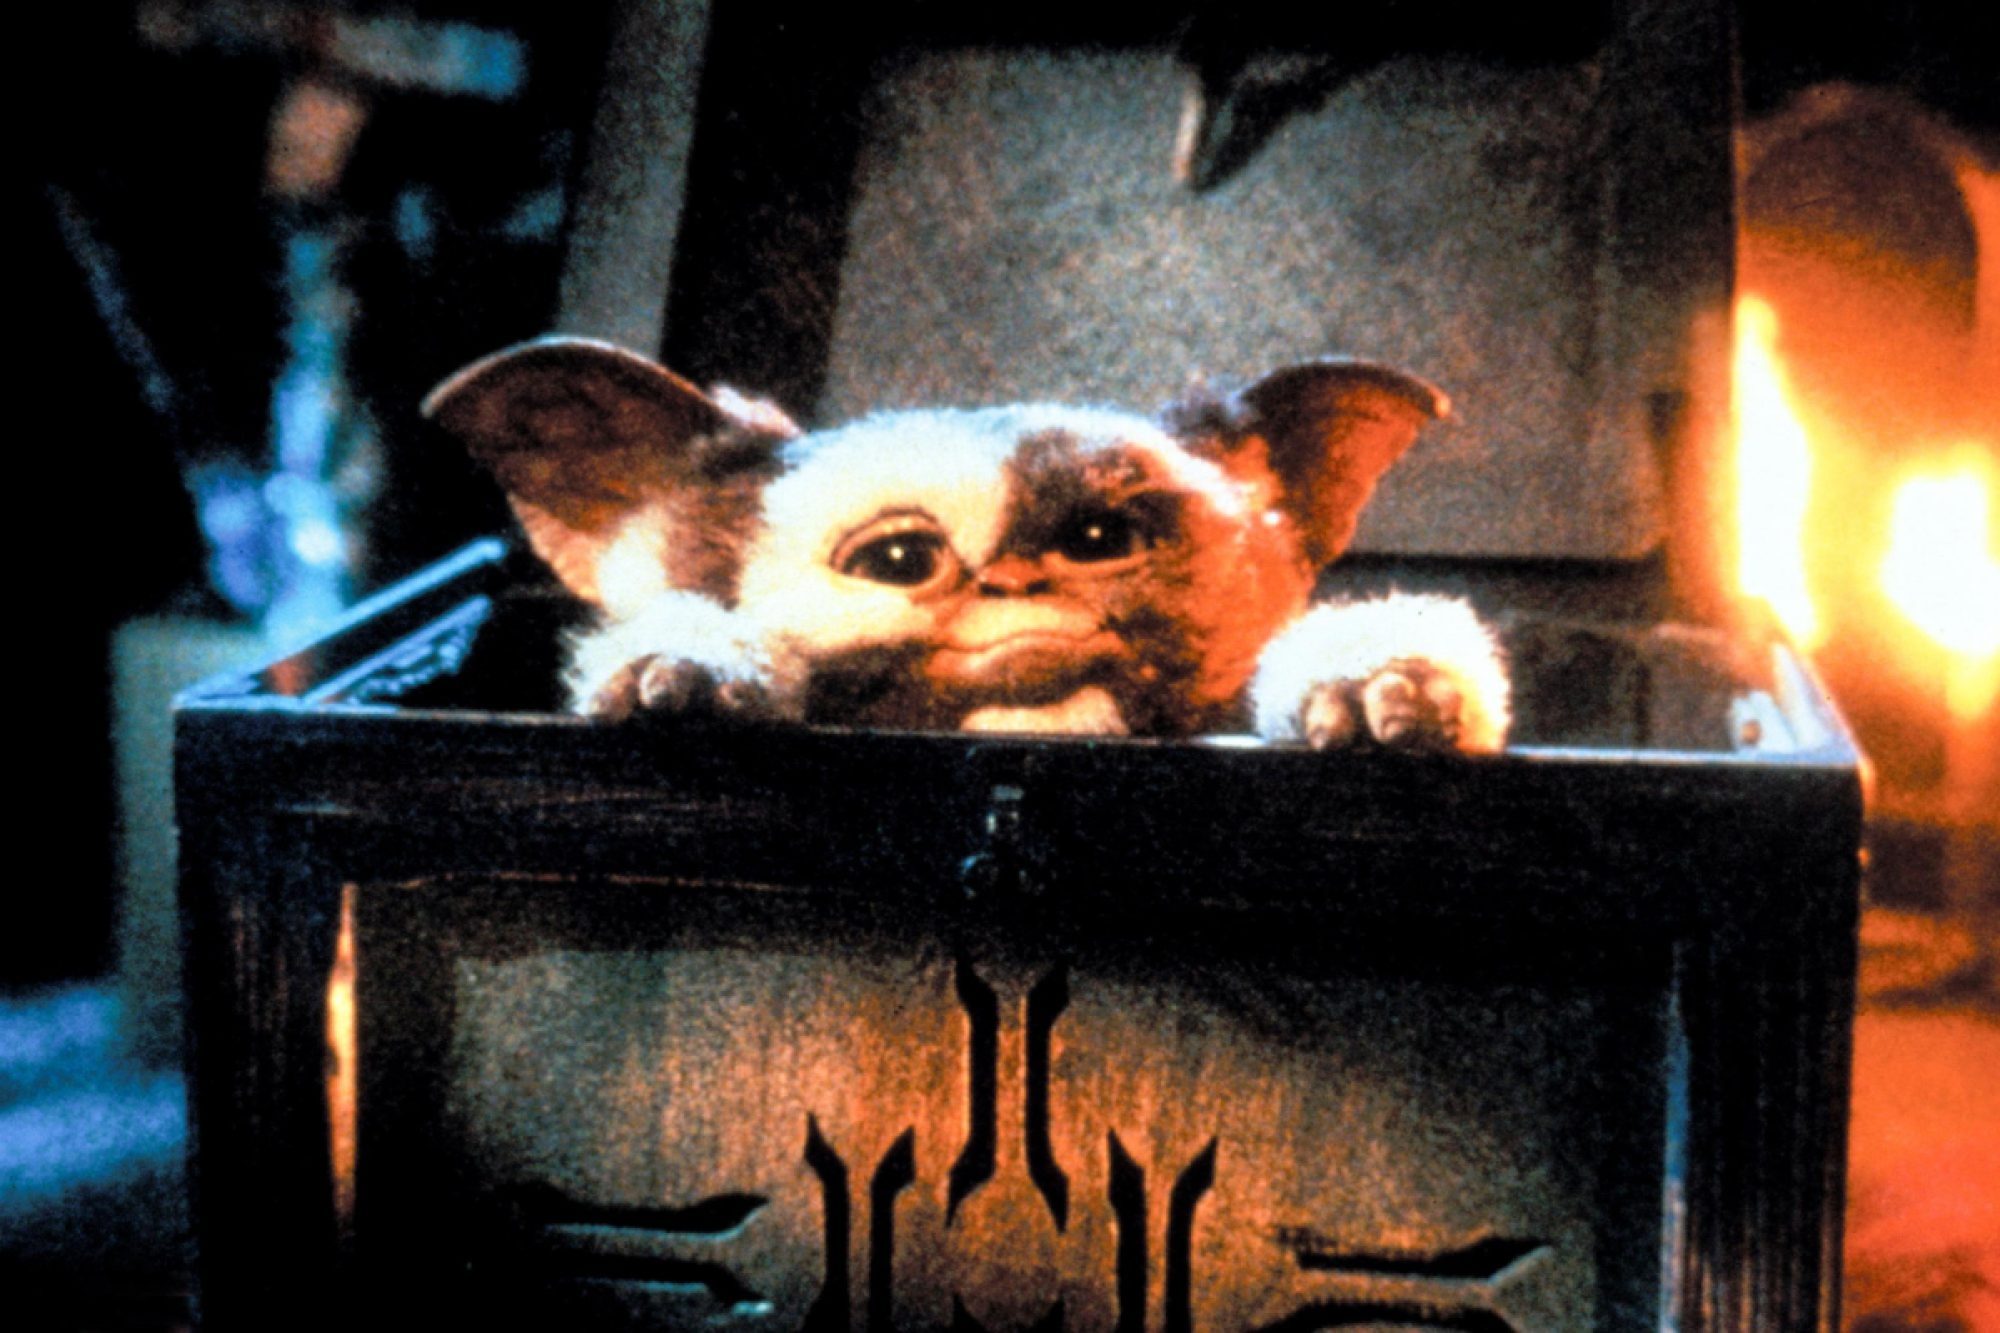 Gizmo looking so cute in Gremlins